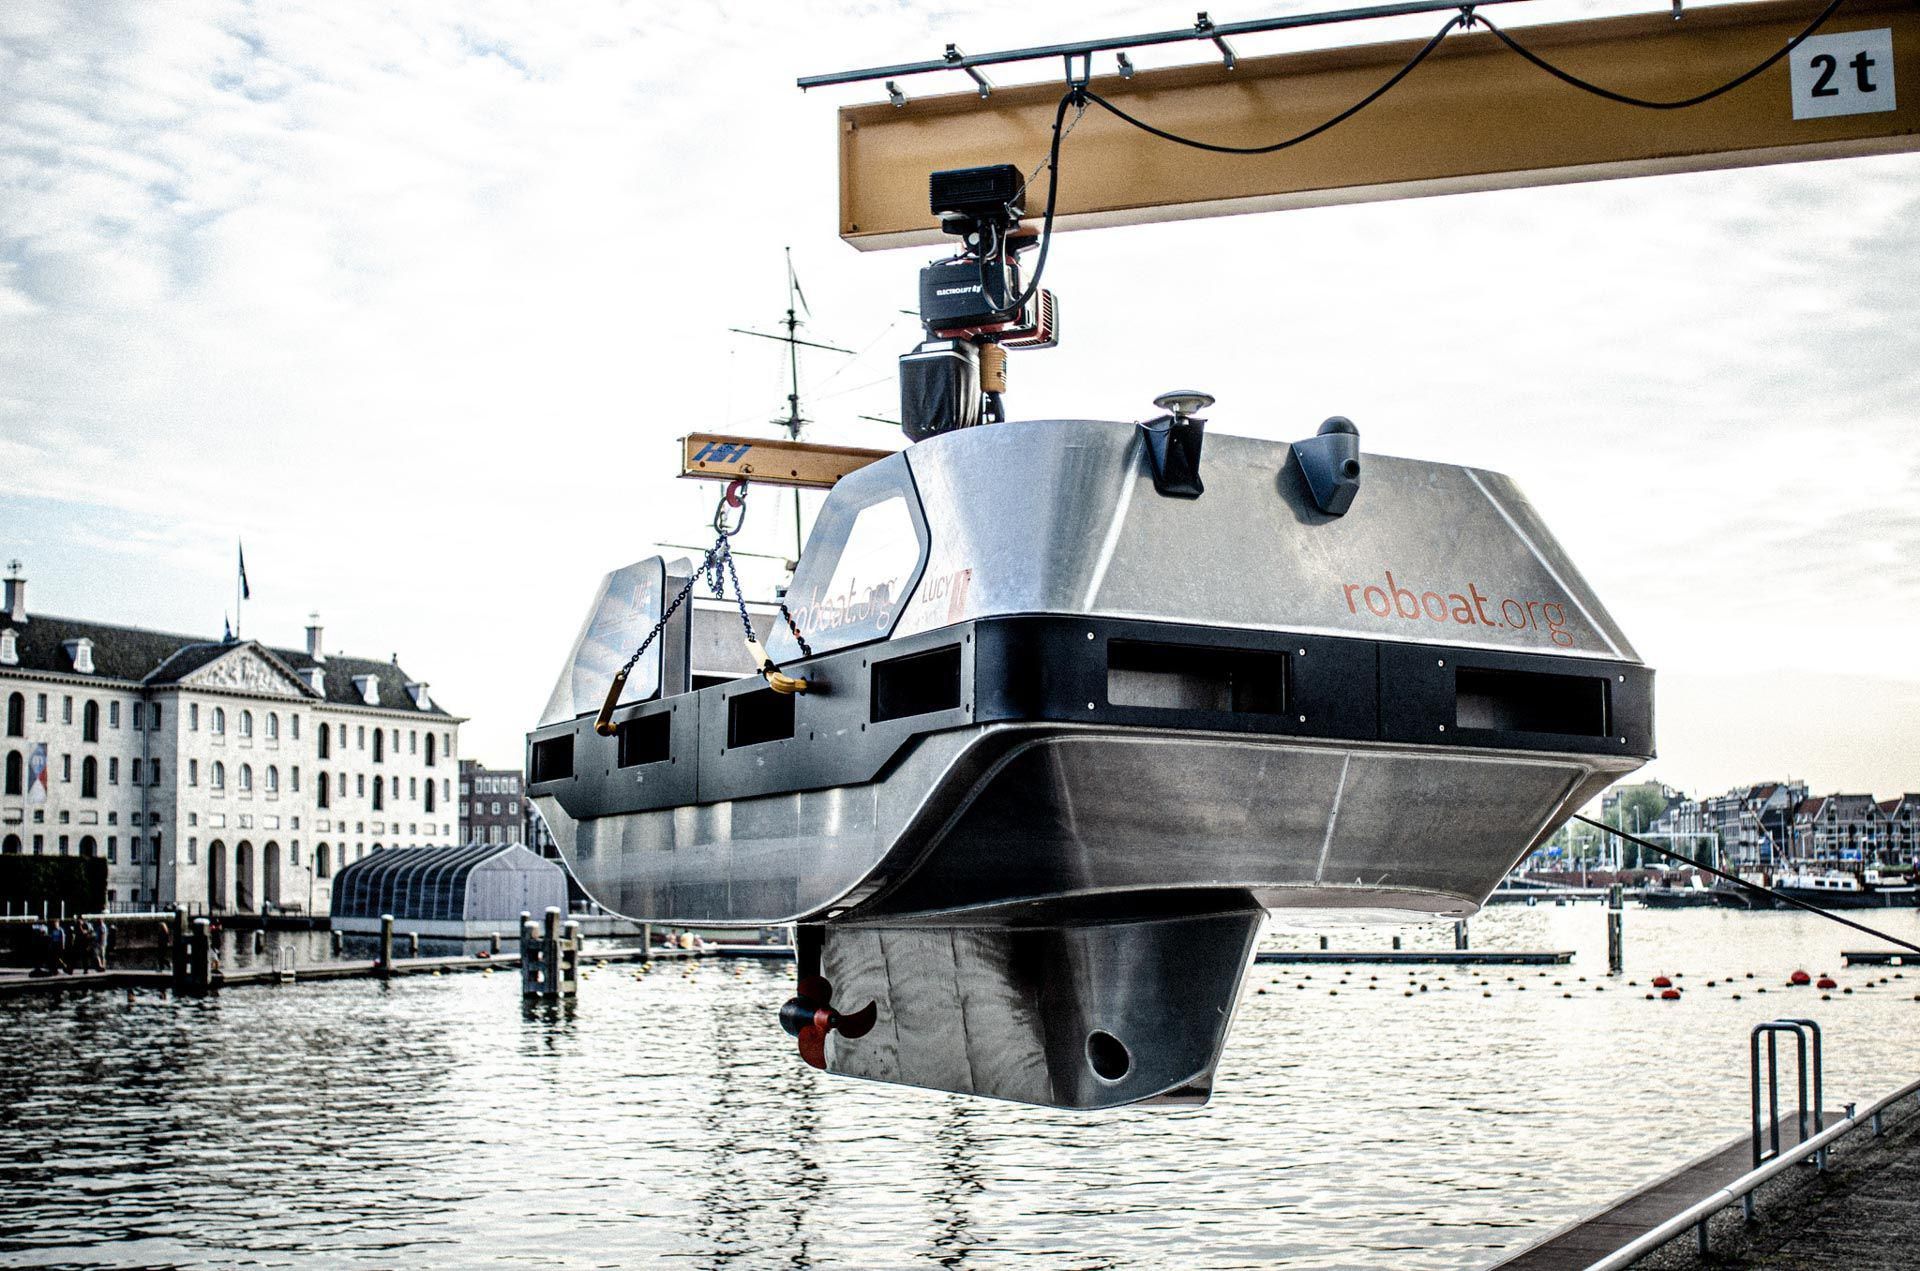 A silver robotic boat hangs from a yellow crane over an Amsterdam canal